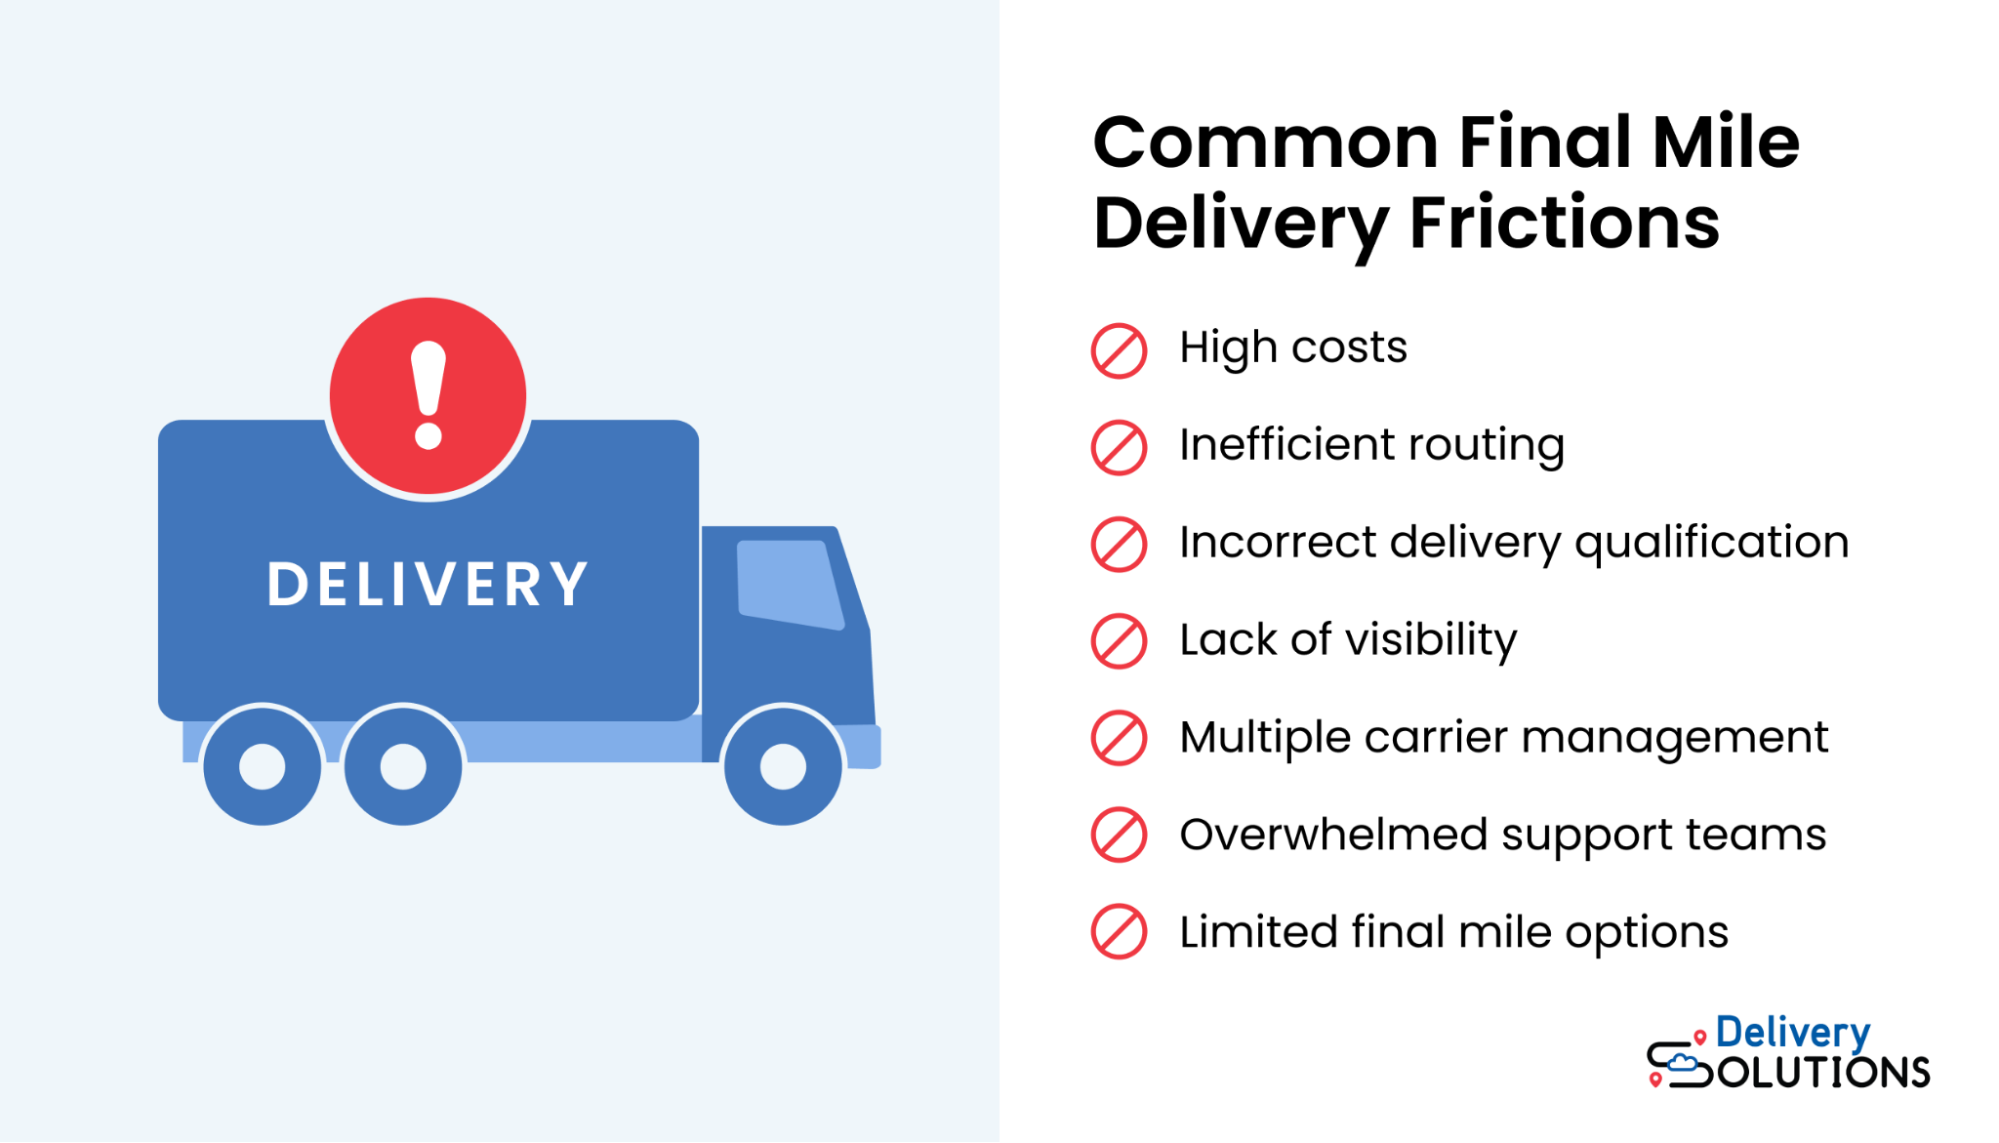 Frictions and problems with final mile delivery